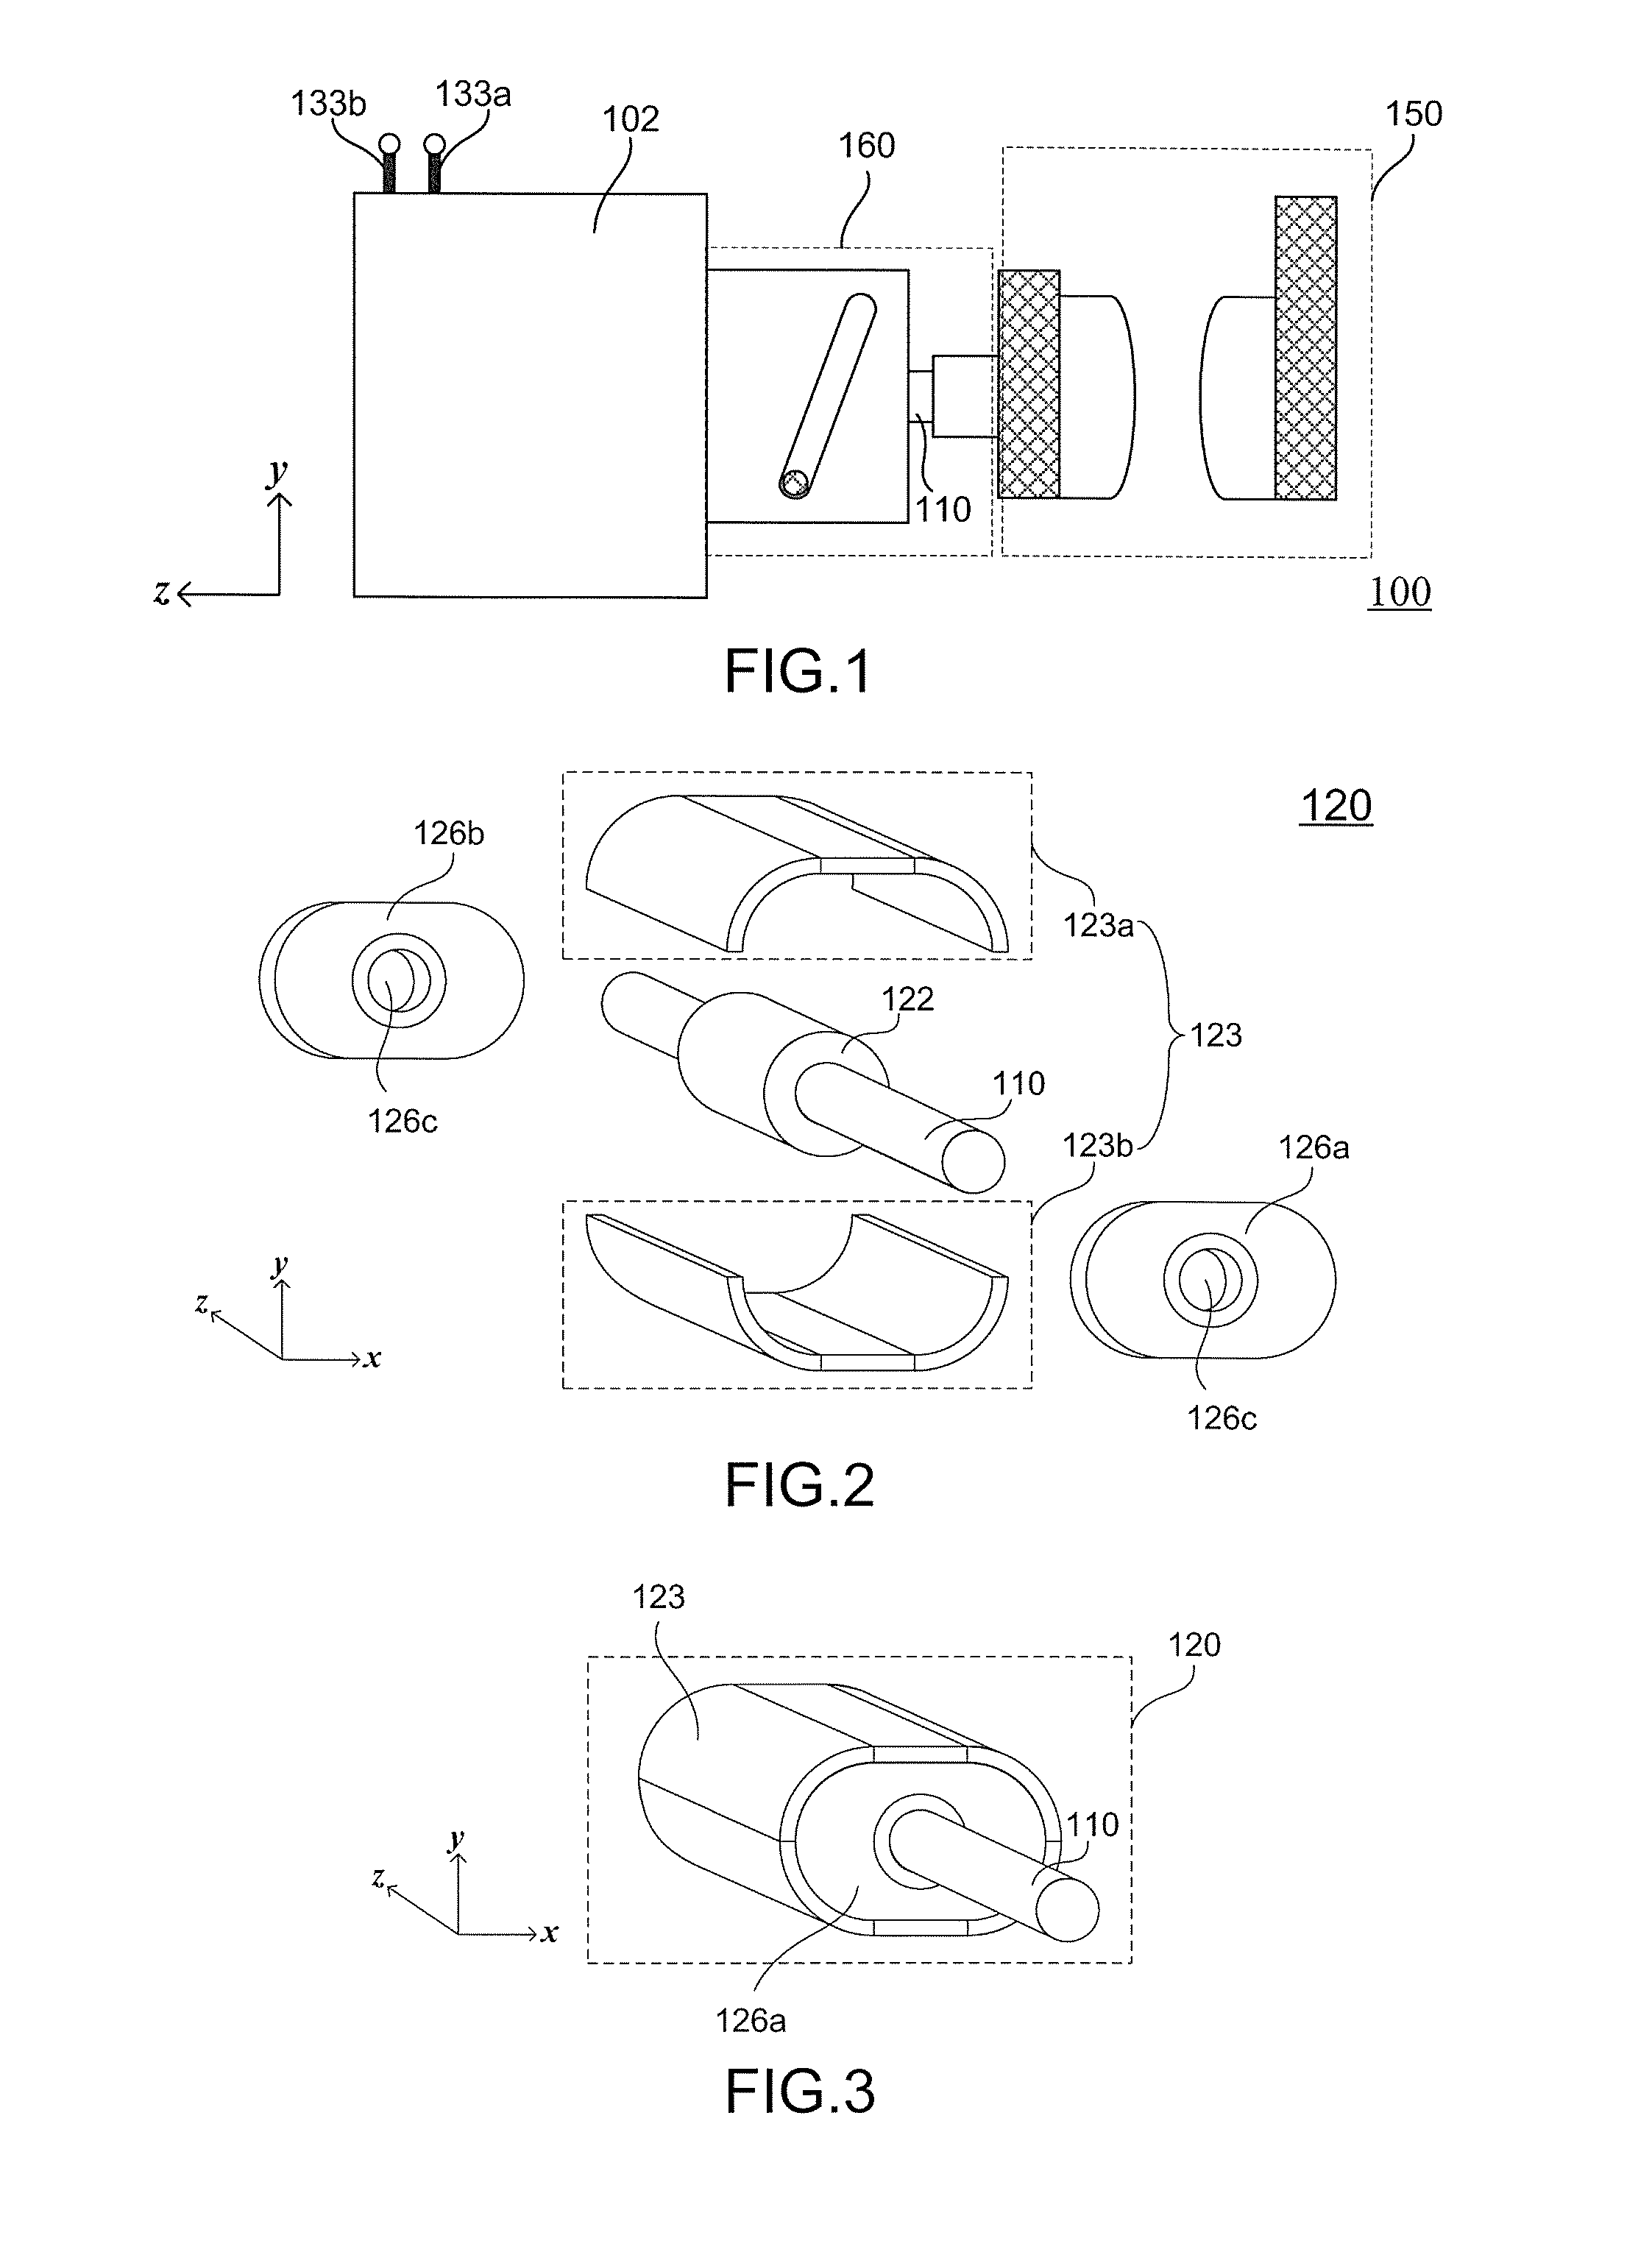 Bistable relay and bistable actuator